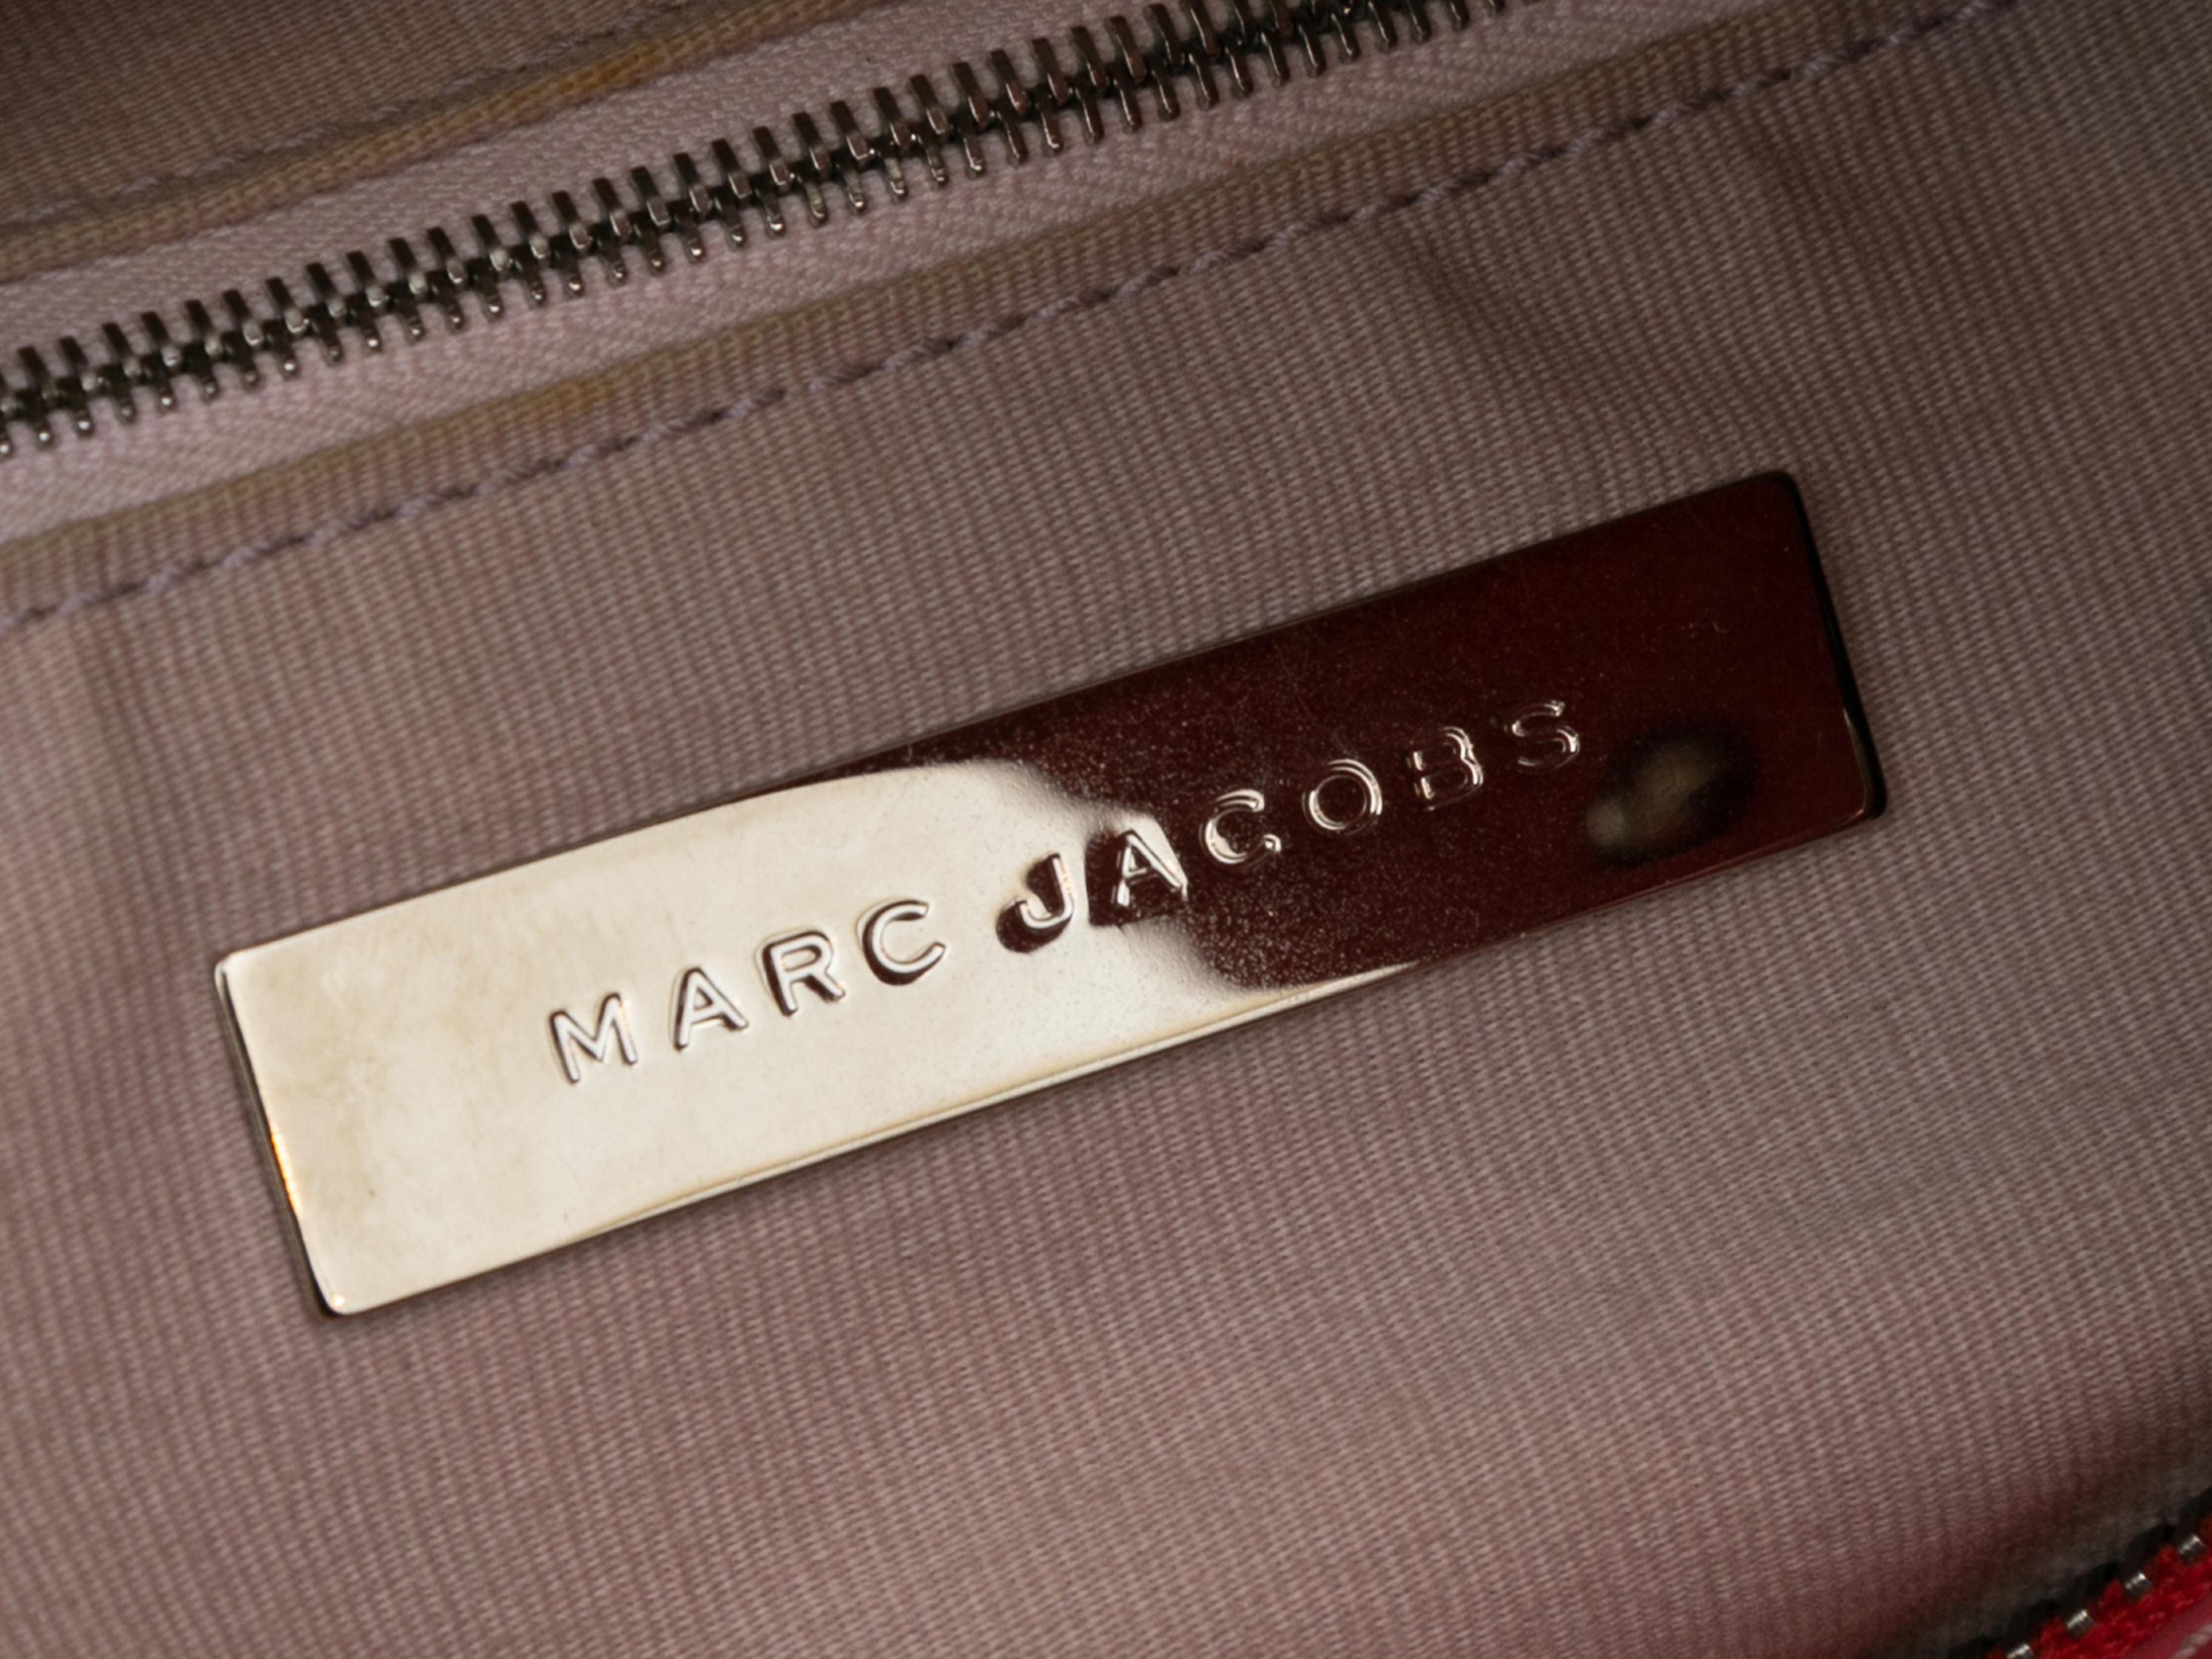 Product Details: Vintage Pink Marc Jacobs Hobo Shoulder Bag. This bag features a leather body, silver-tone hardware, a single flat shoulder strap, and a zip closure at the top. 16